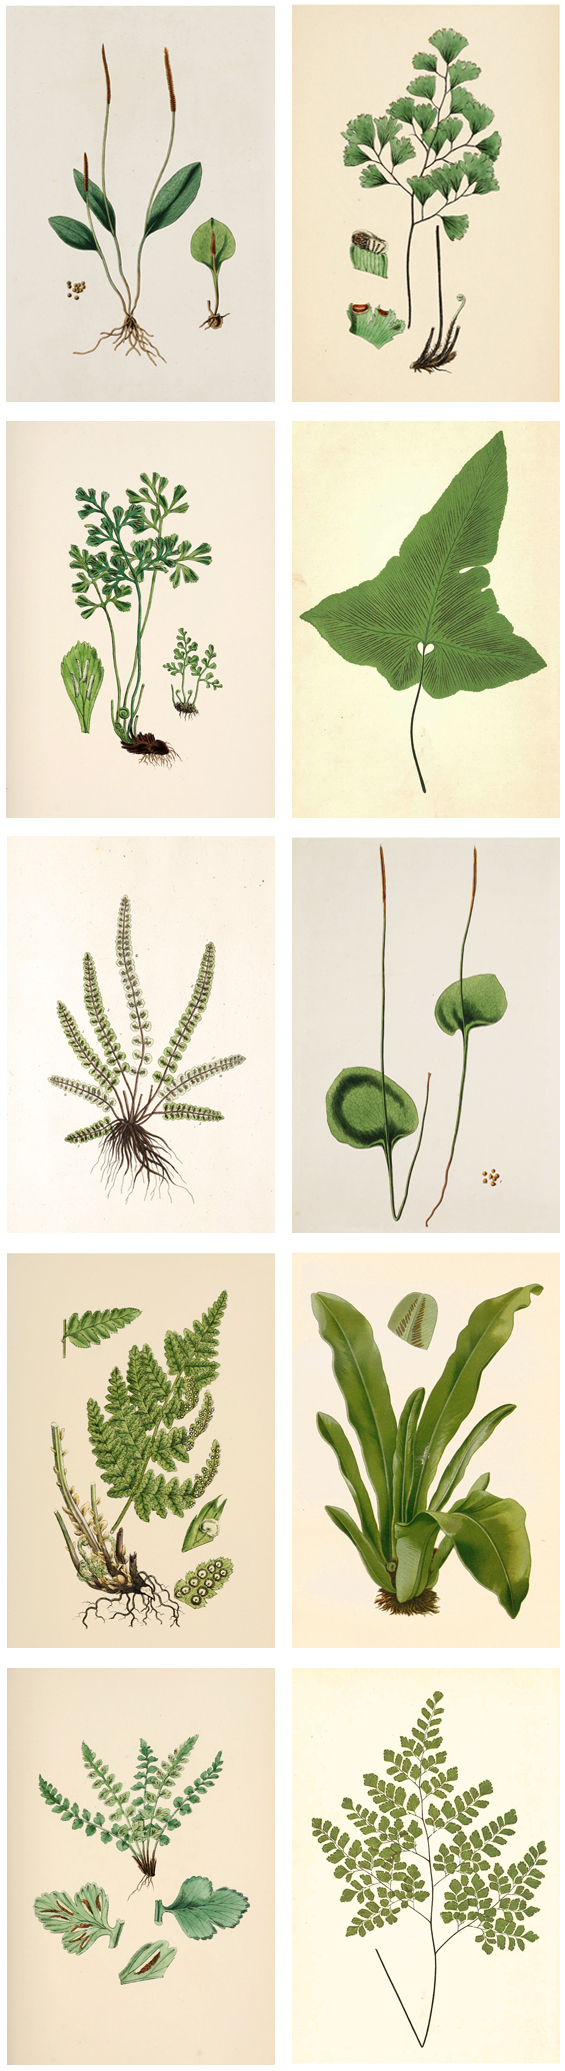 Free Printable Wall Art Plant Illustrations | The Painted Hive